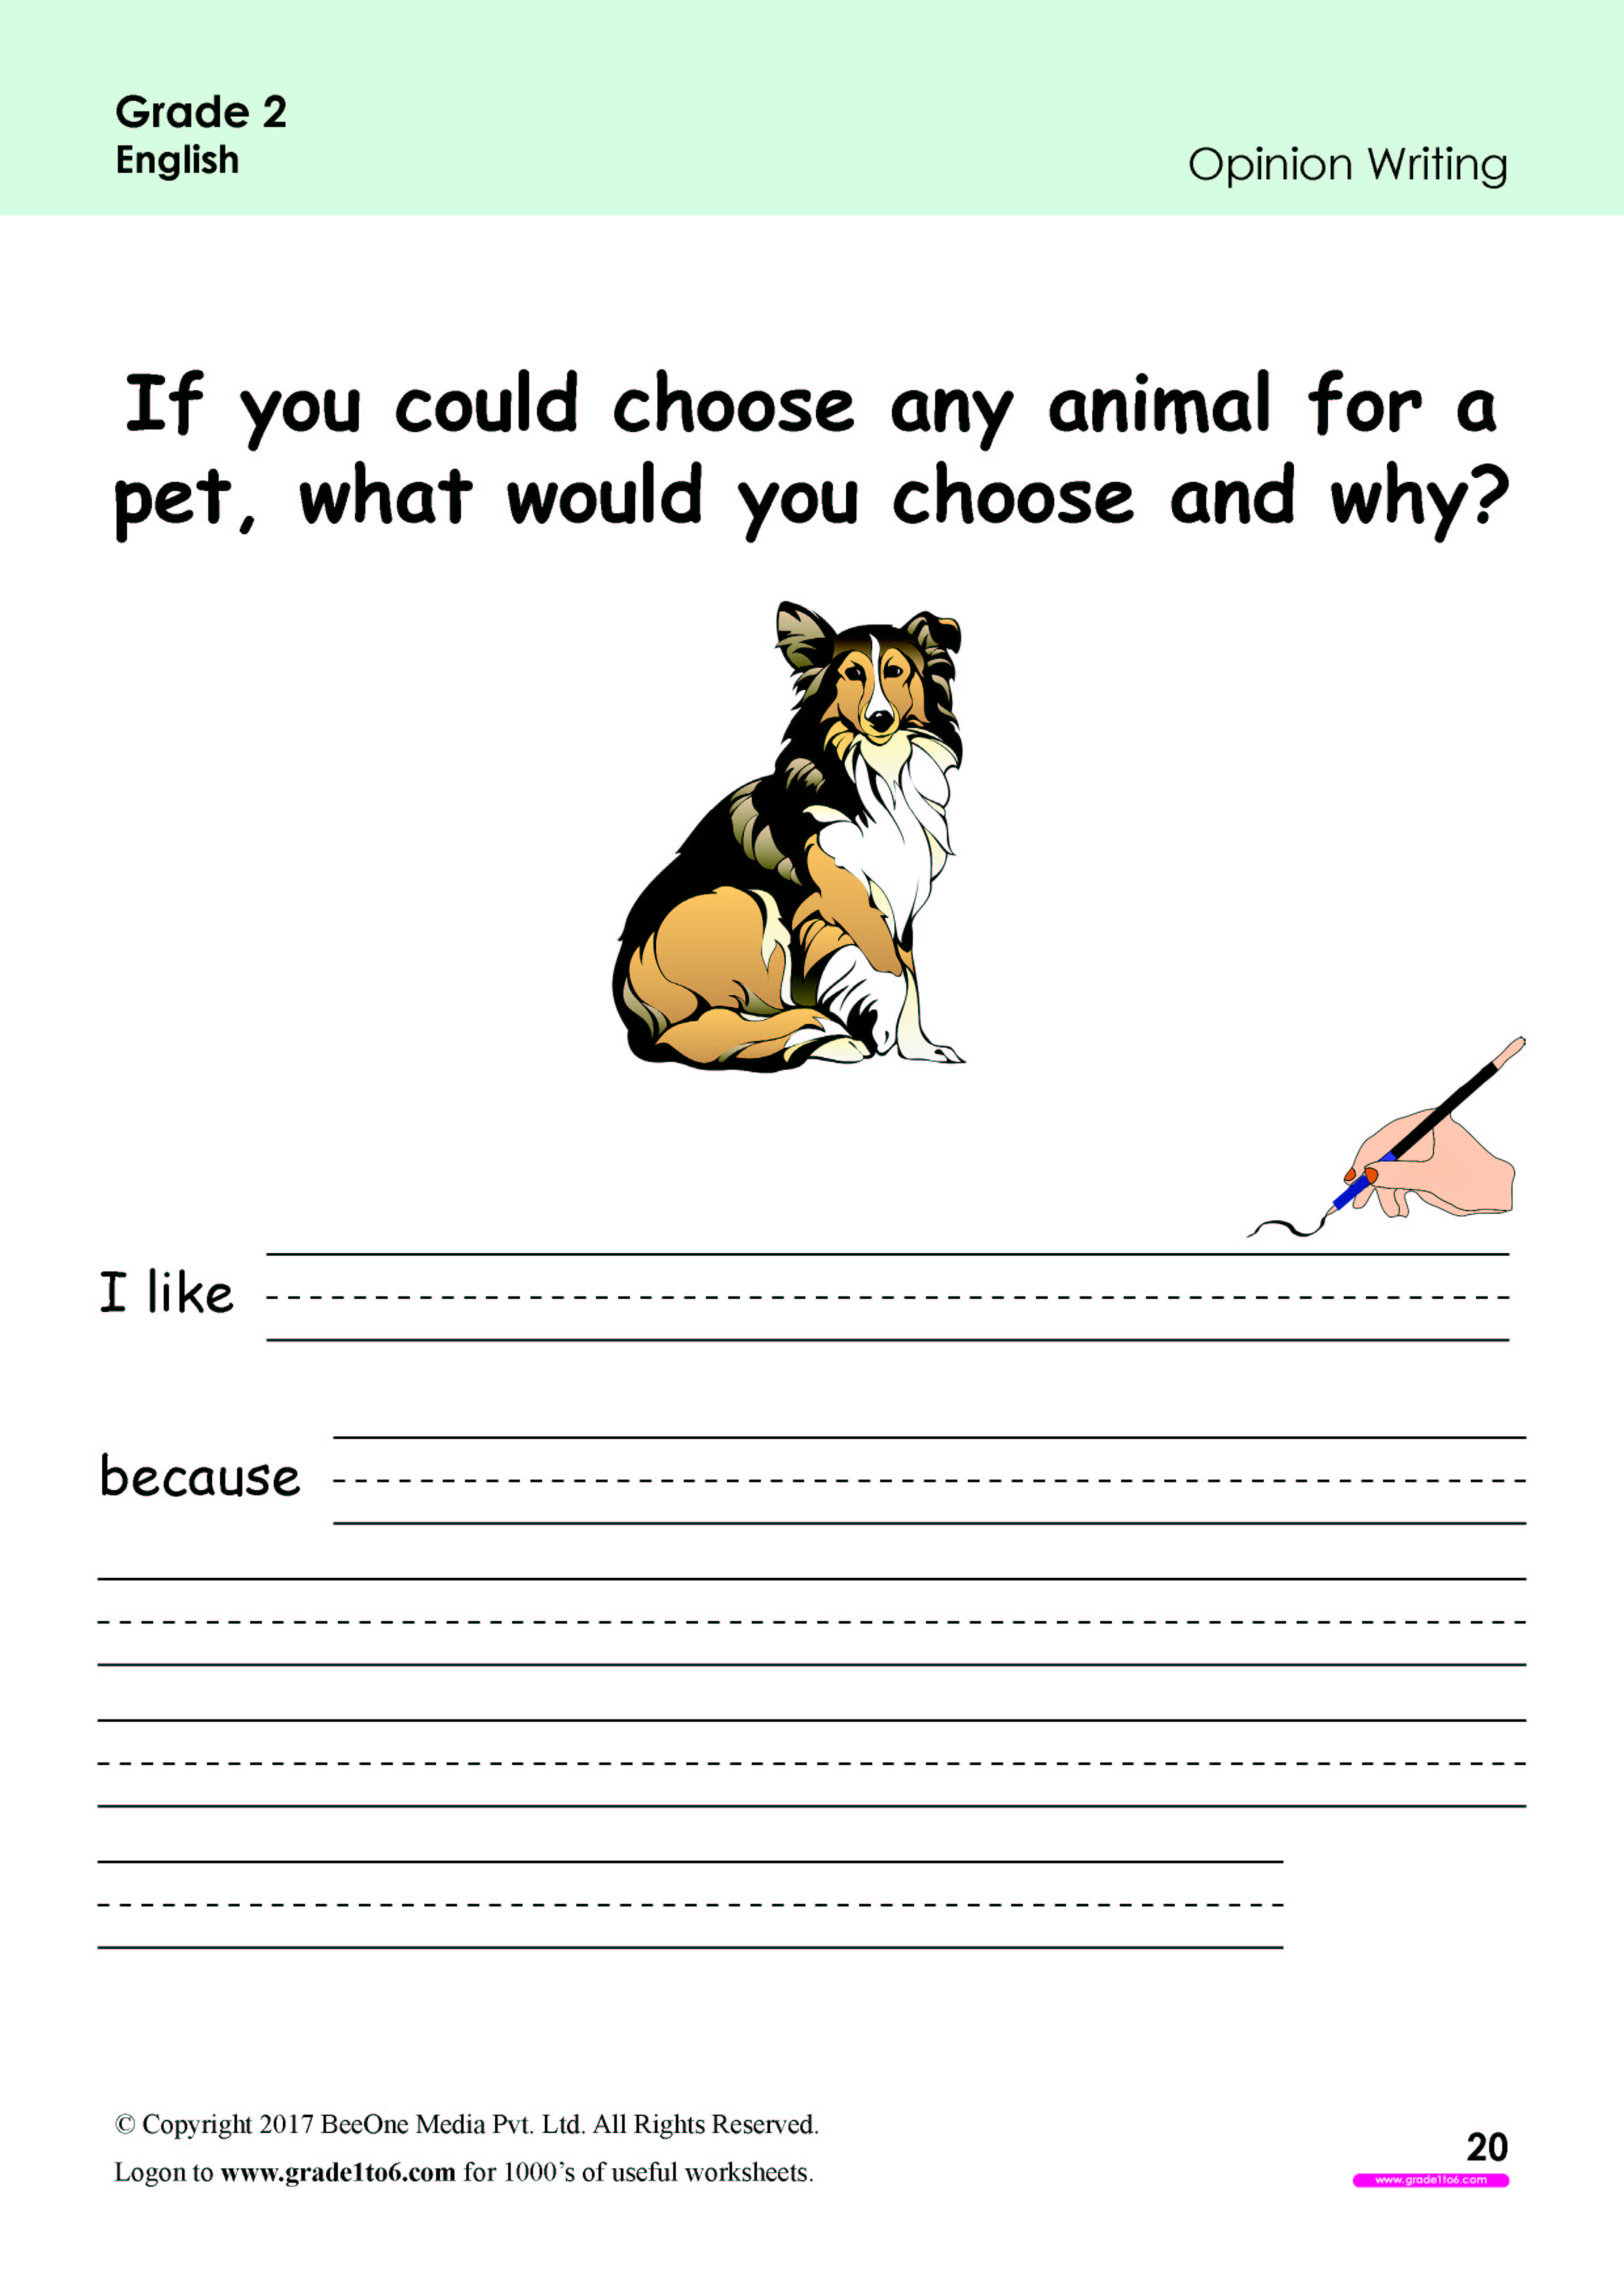 opinion writing worksheets for grade 2 www grade1to6 com